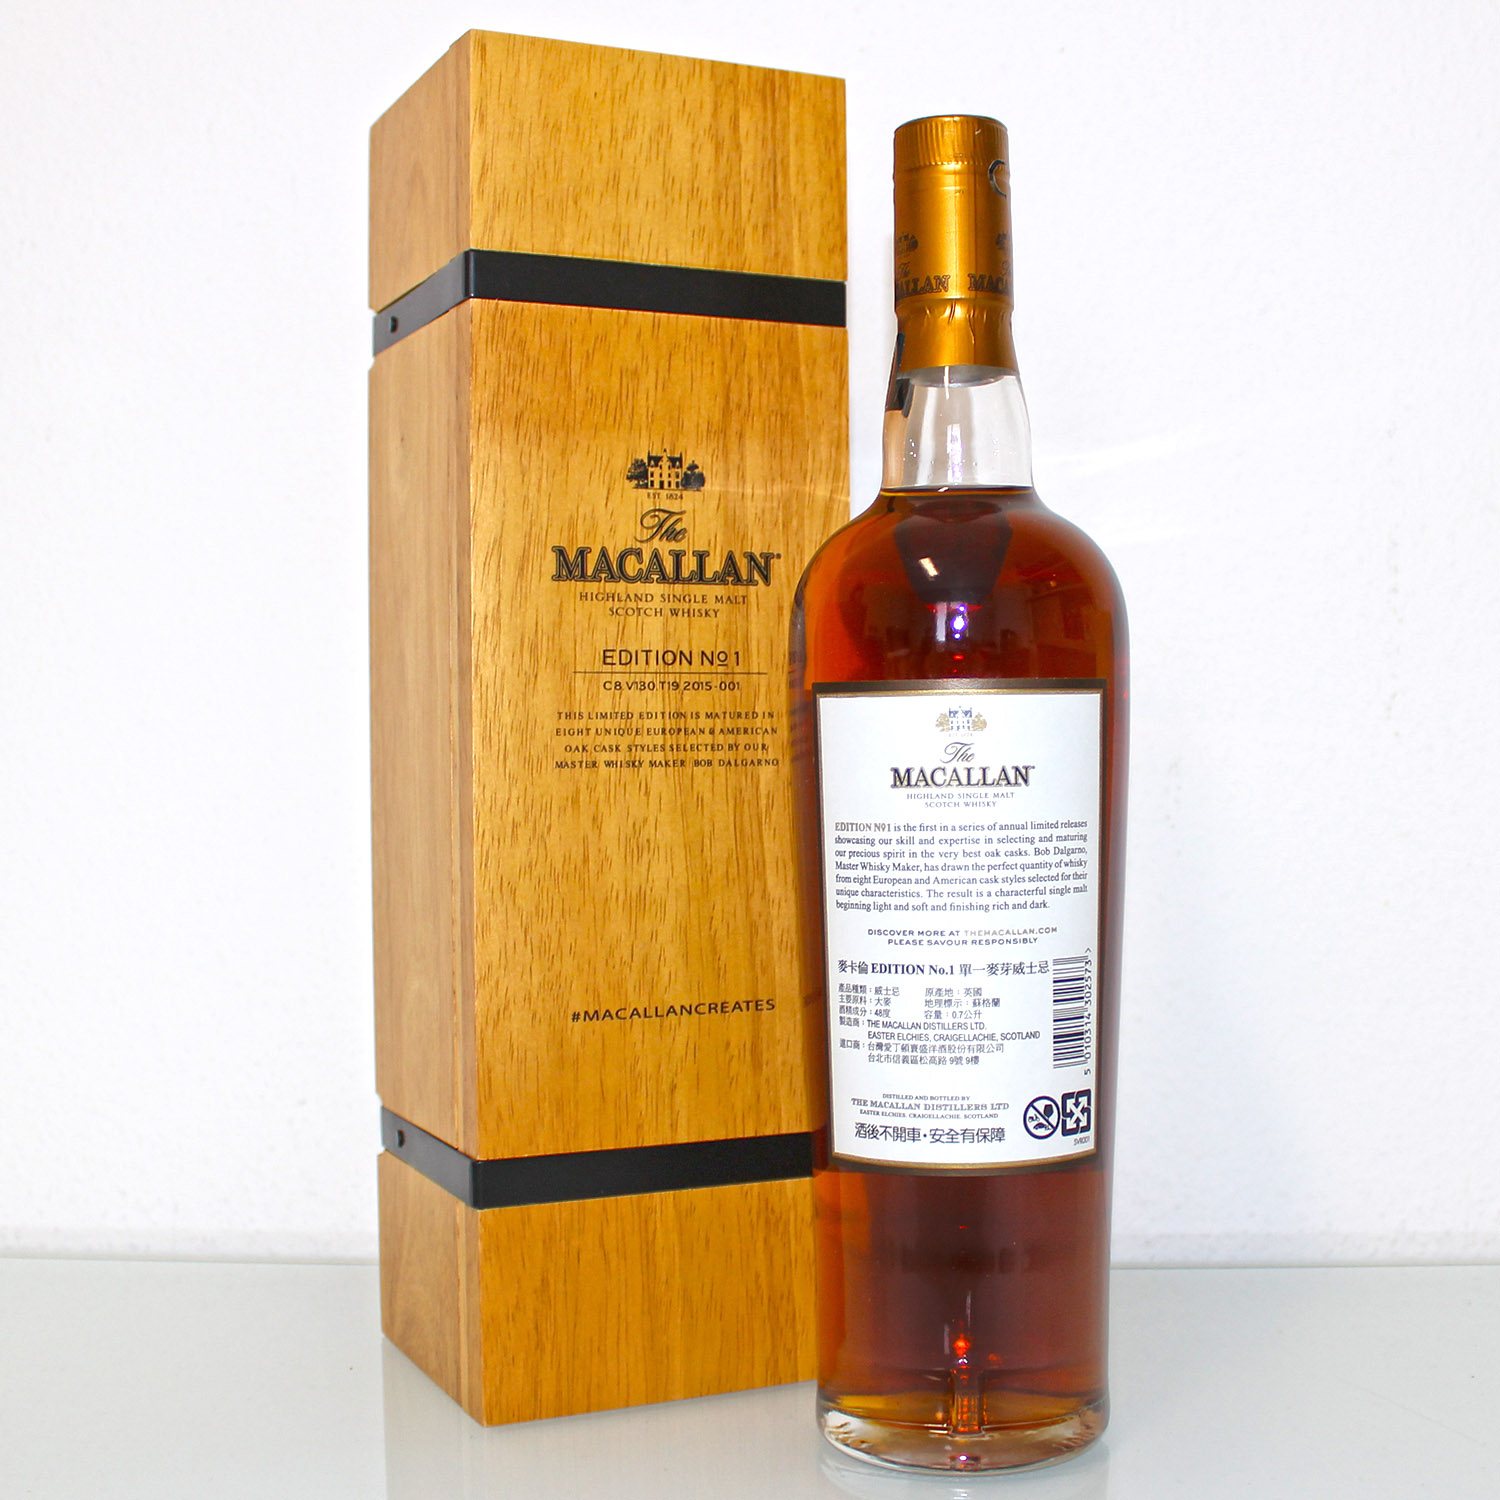 Macallan Edition No 1 in Wooden Box Back